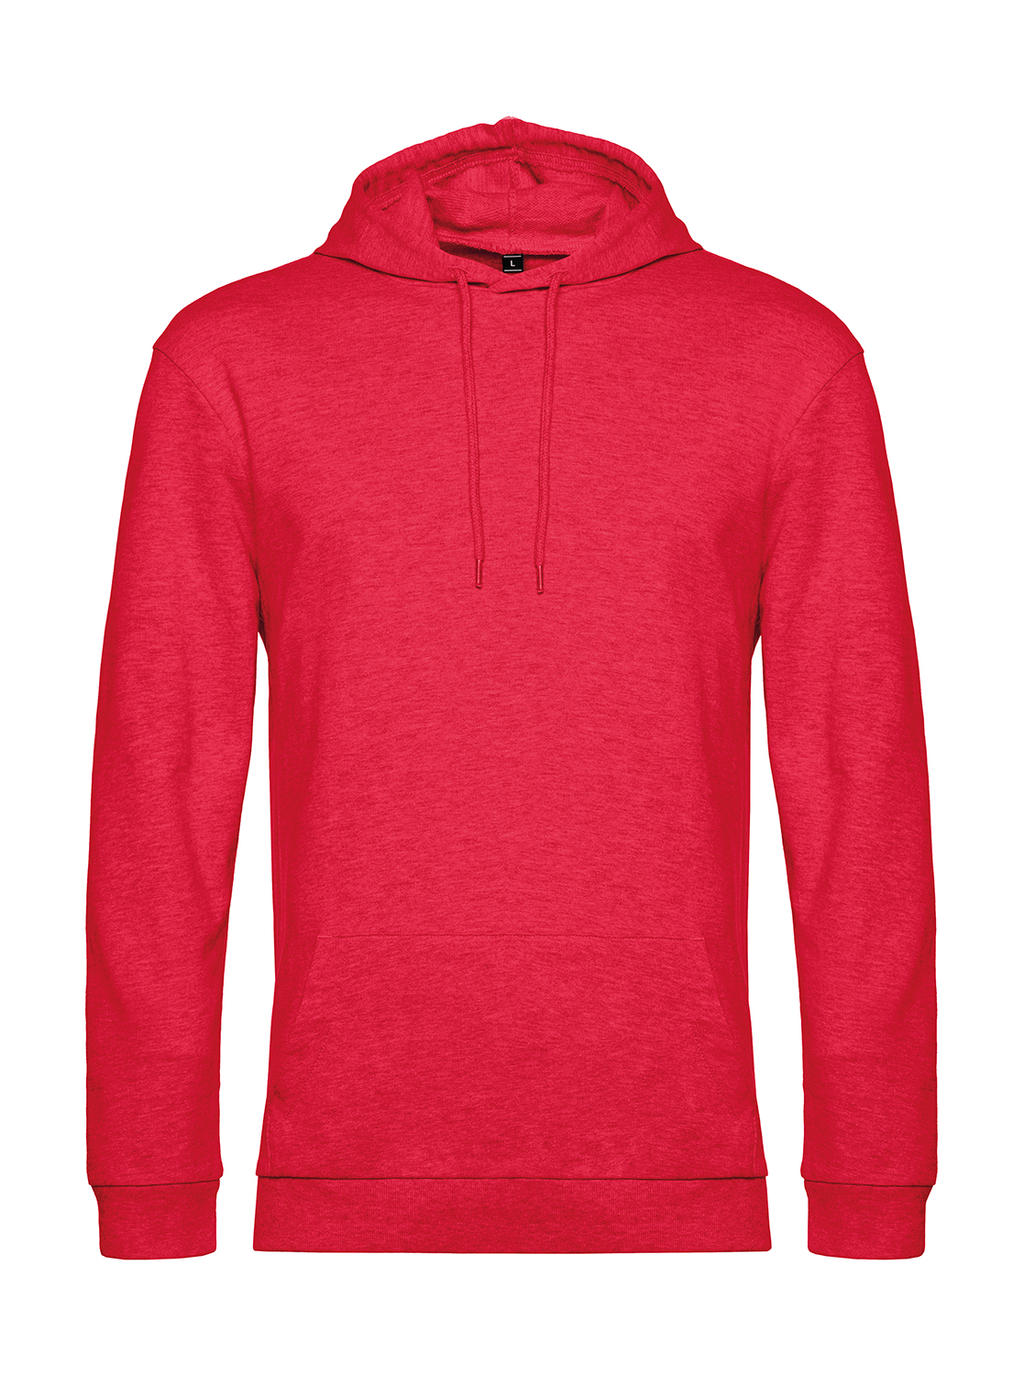 Mikina s kapucňou #Hoodie French Terry - heather red